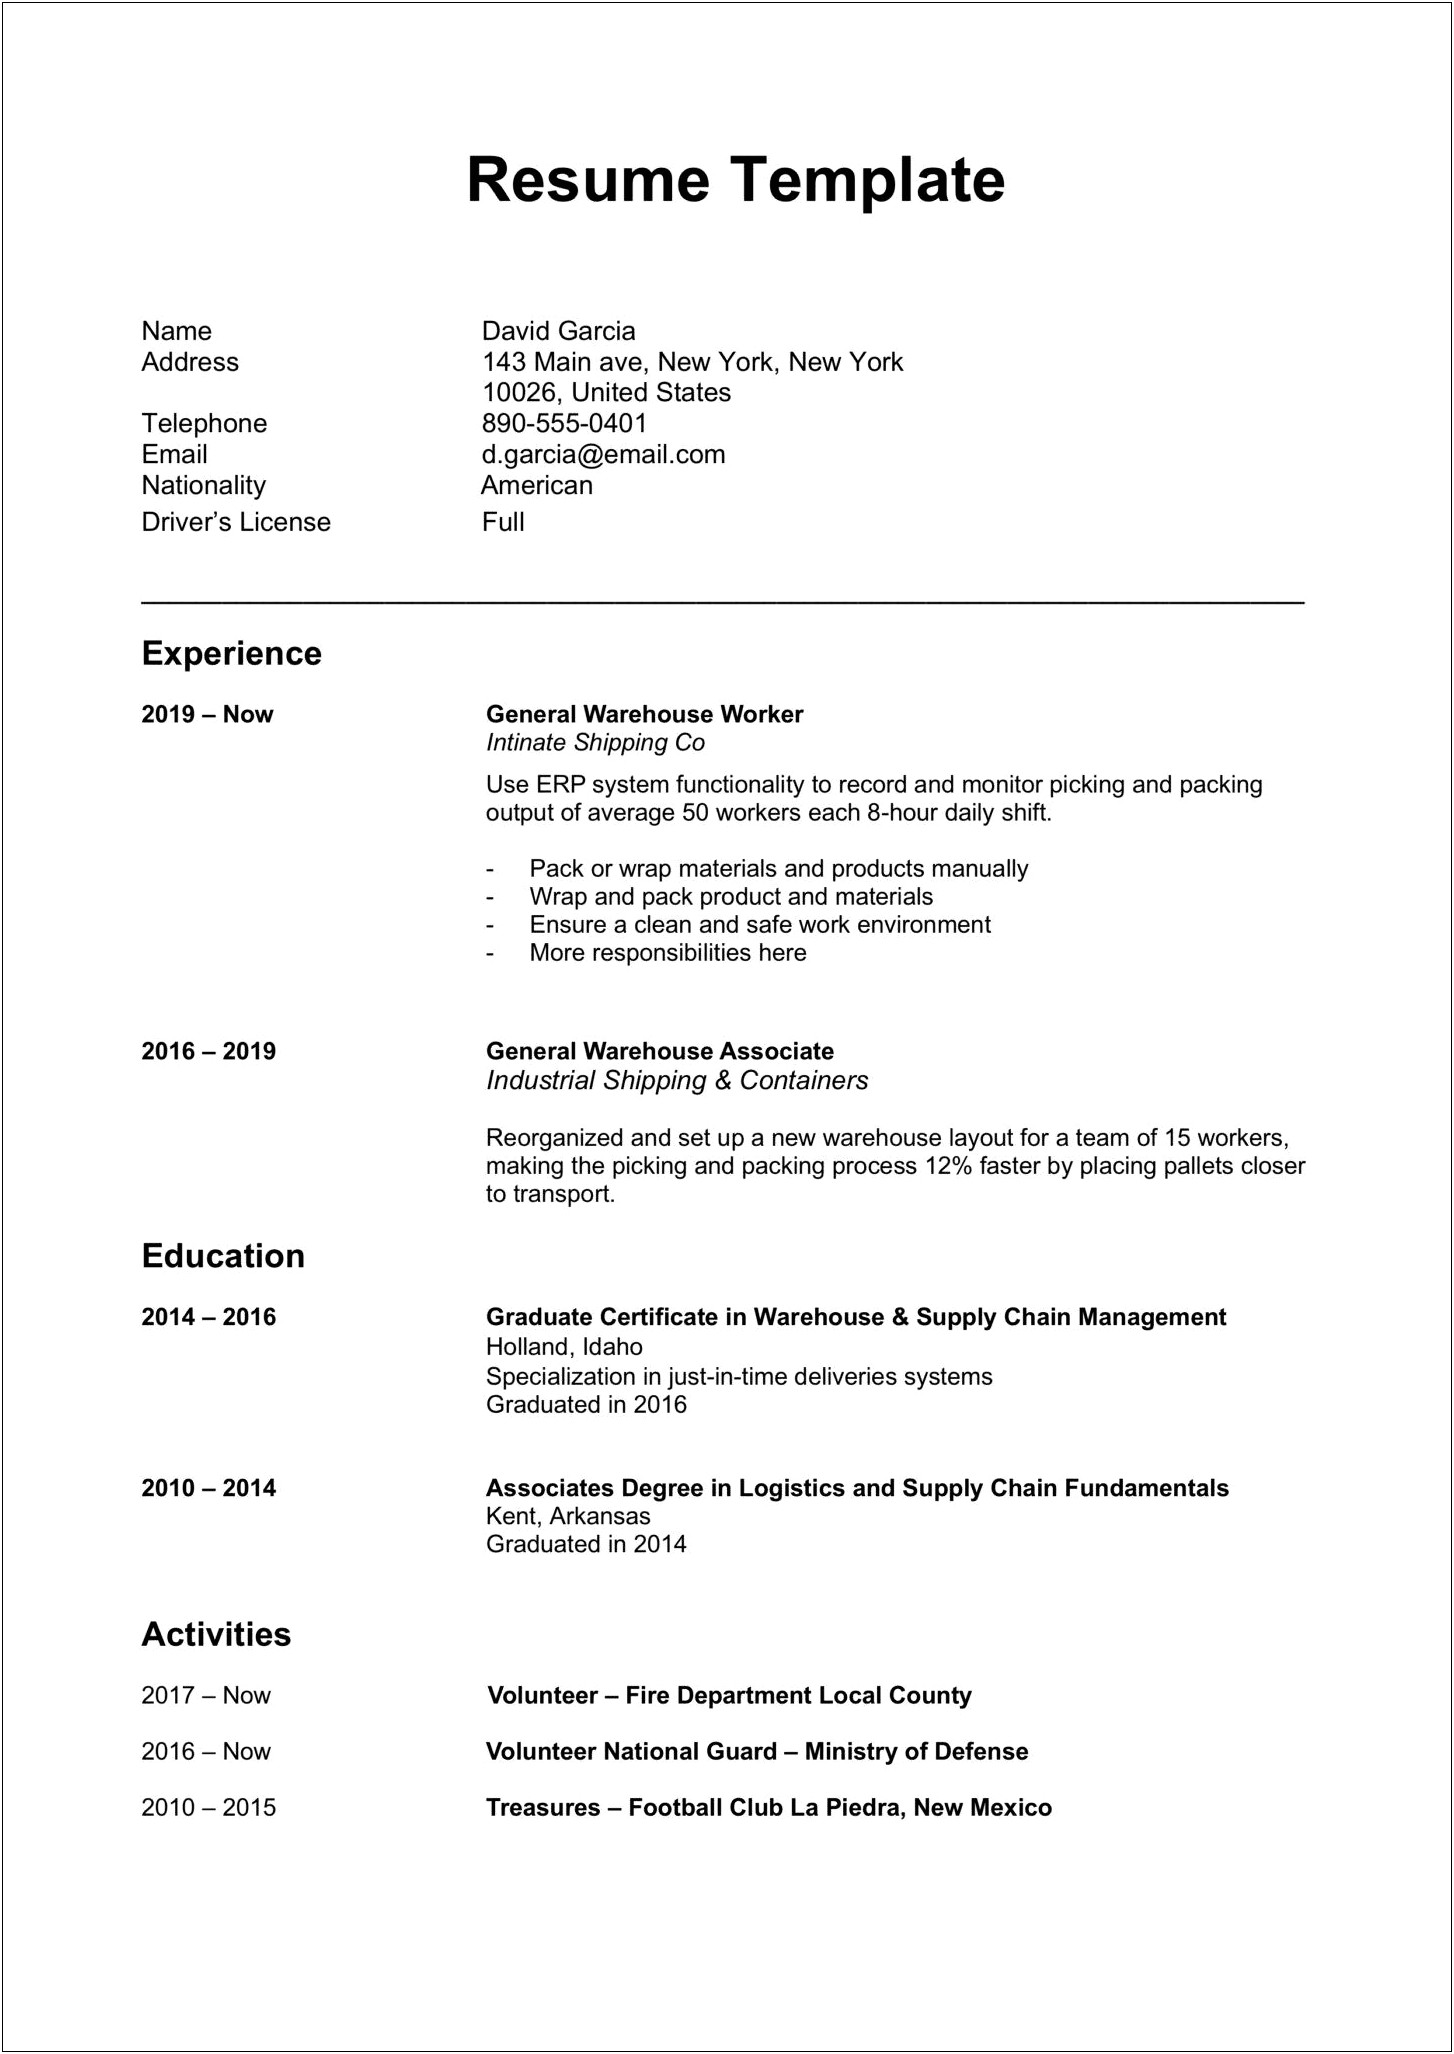 Resume Format For Job Interview Ms Word Download